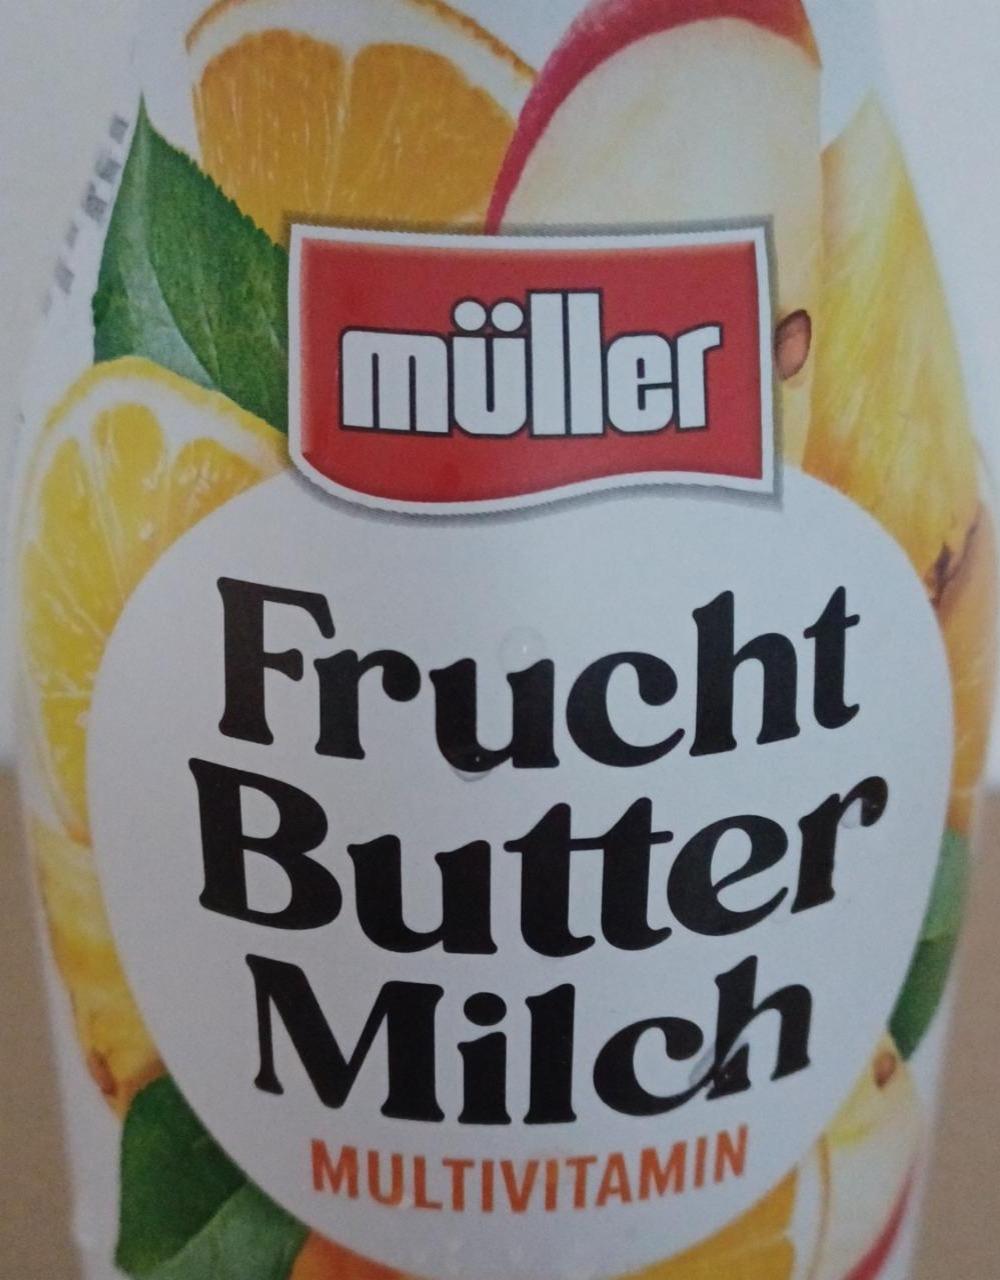 Фото - Frucht Butter Milch Multivitamin Müller